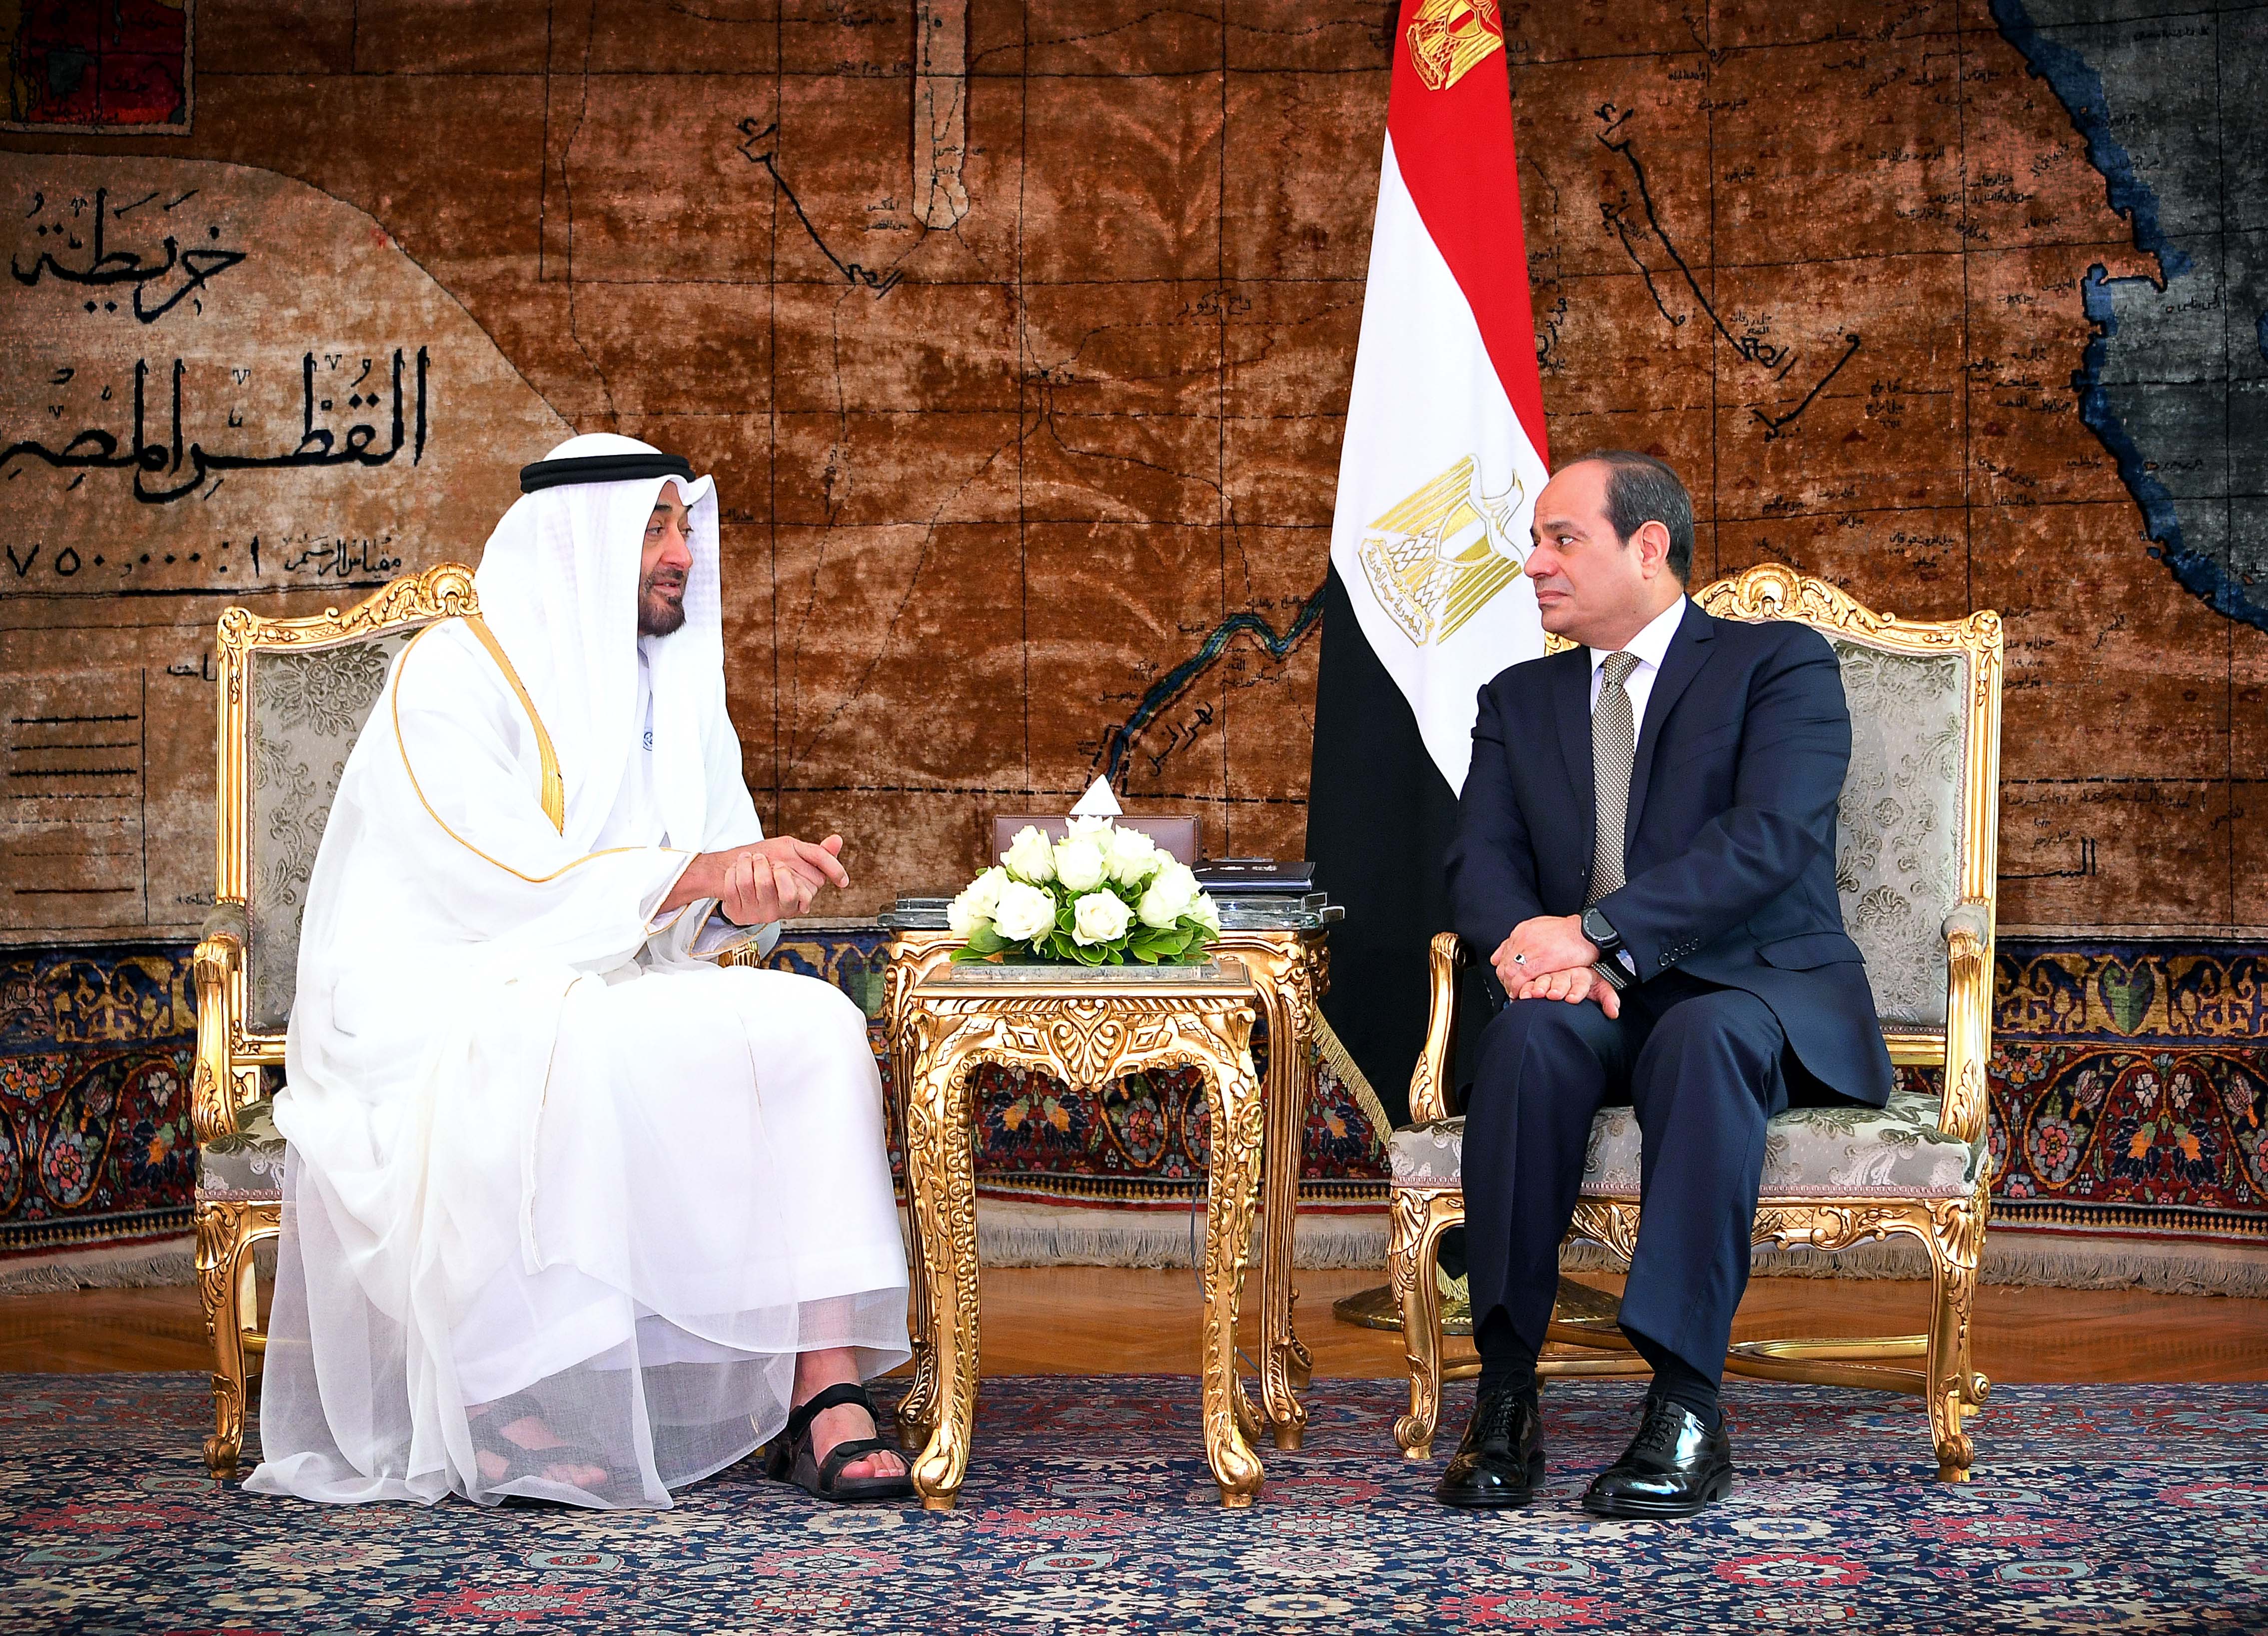 Egyptian President Abdel-Fattah Al-Sisi meets Abu Dhabi Crown Prince and Deputy Supreme Commander of the UAE Armed Forces Sheikh Mohammad bin Zayed